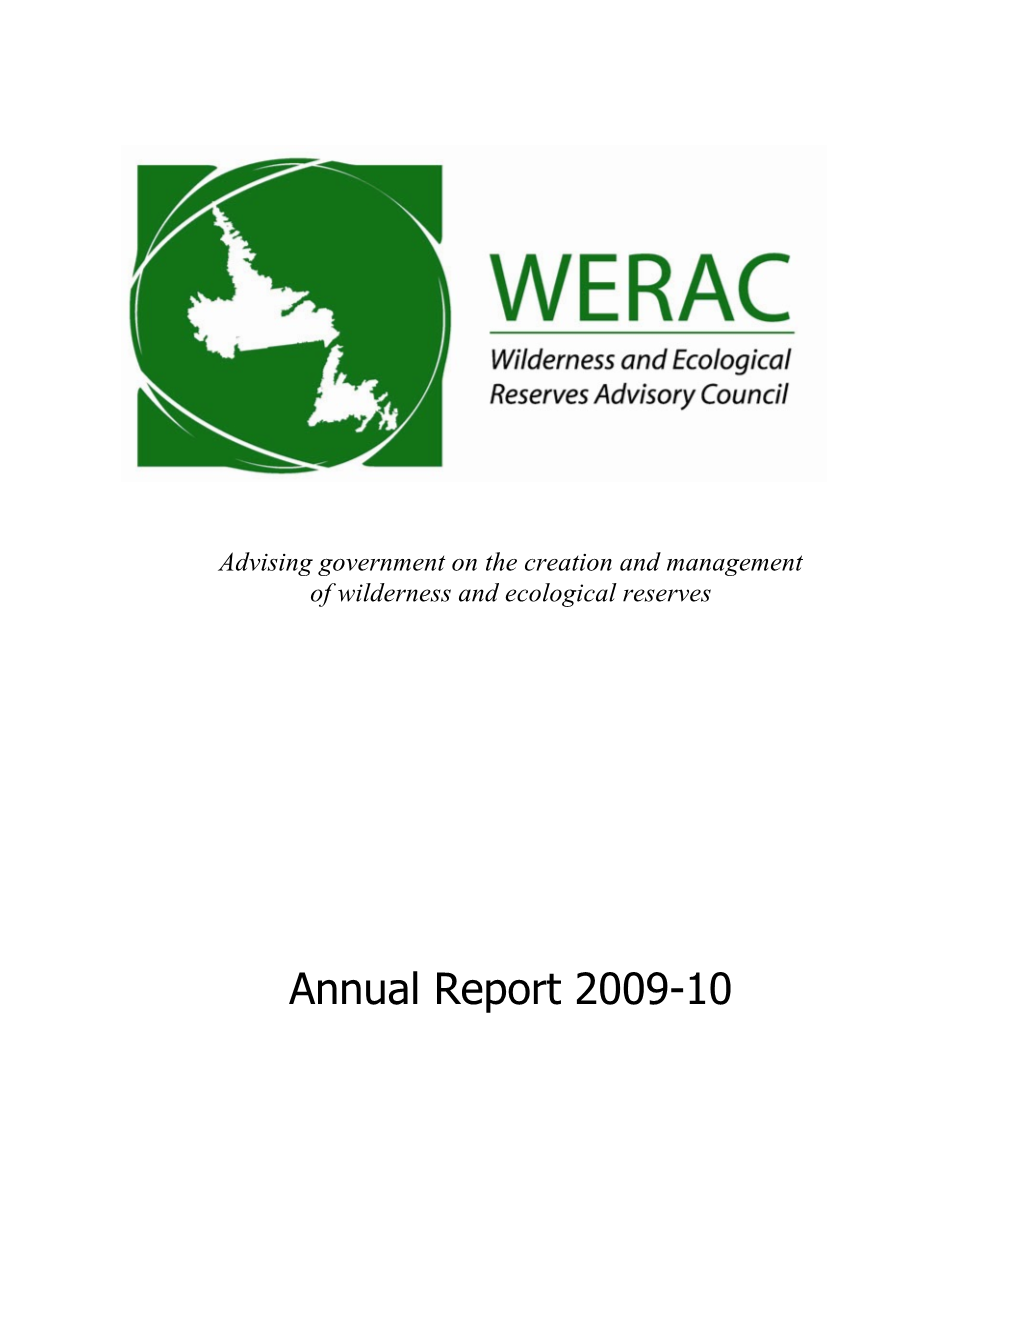 Wilderness and Ecological Reserves Advisory Council (WERAC) 2 Message from Co-Chairs